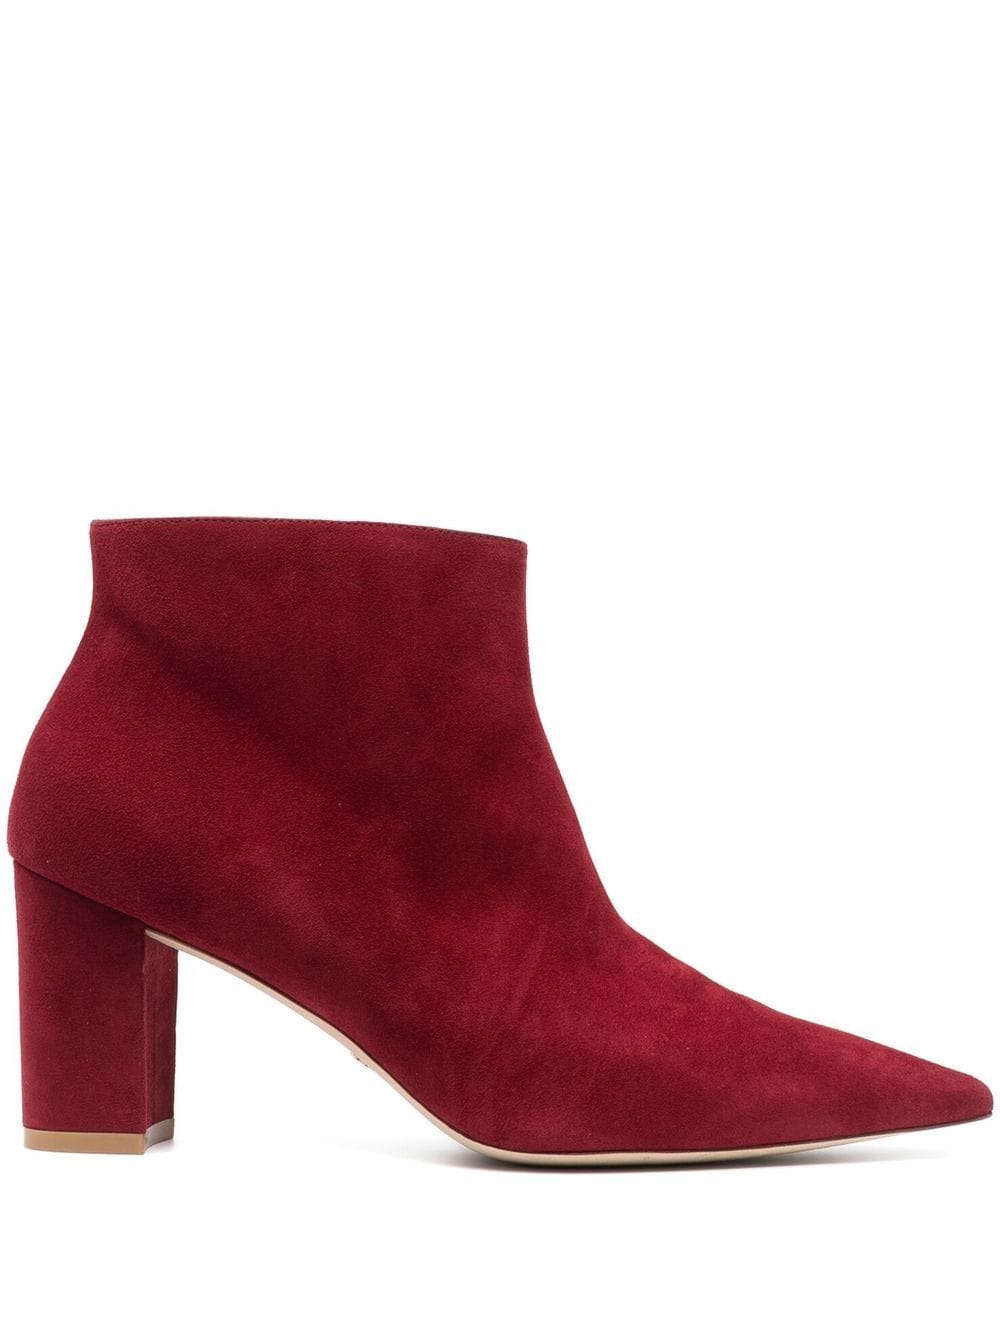 Image 1 of Stuart Weitzman Sue suede 70mm ankle boots